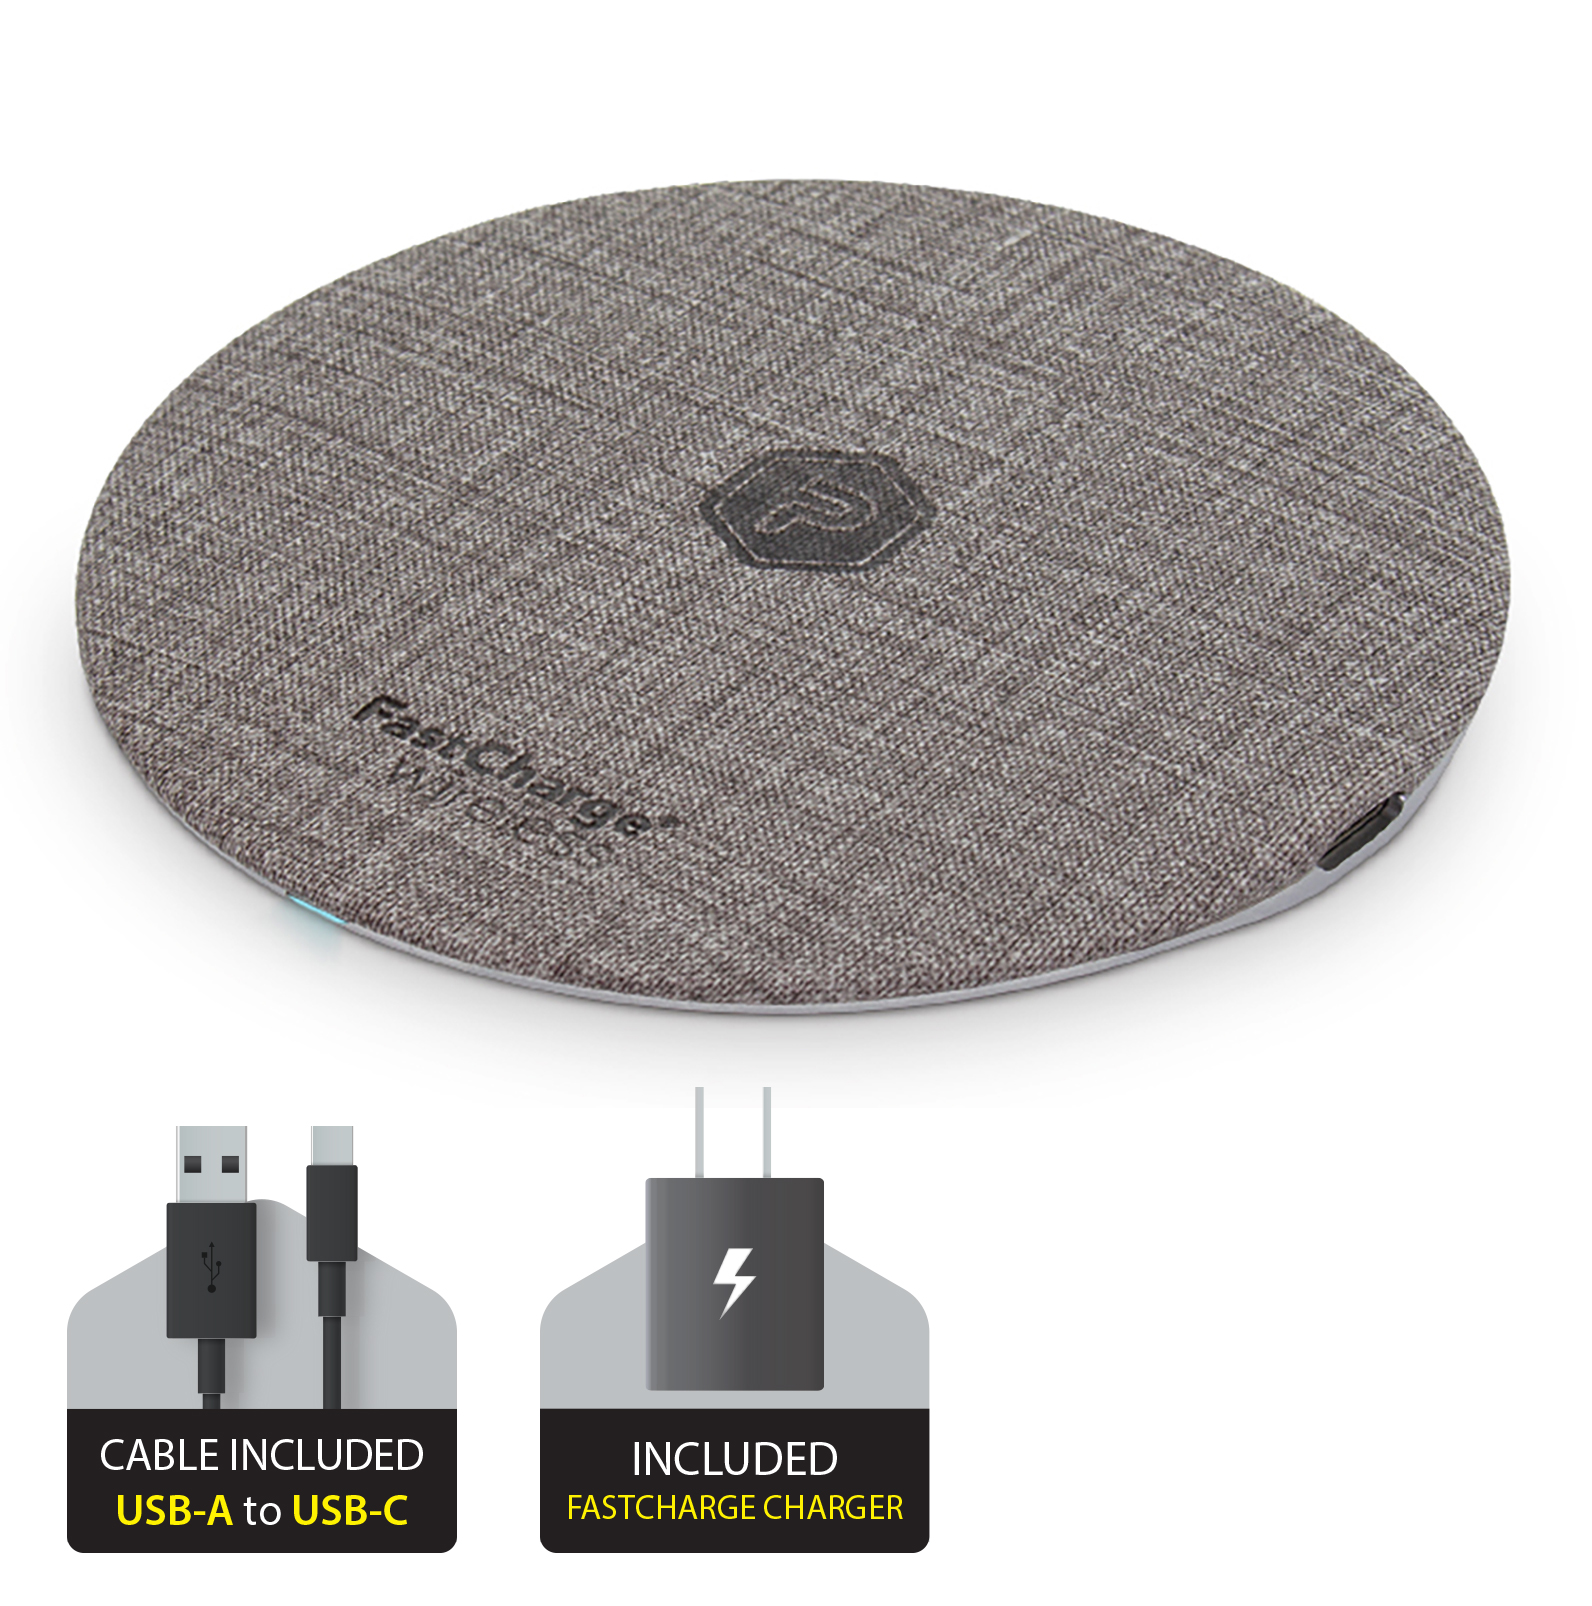 Gray Wireless Fast Charging Circle Pad for Qi-Compatible Devices with Black USB-A to USB-C Cable and fast Charger Adapter